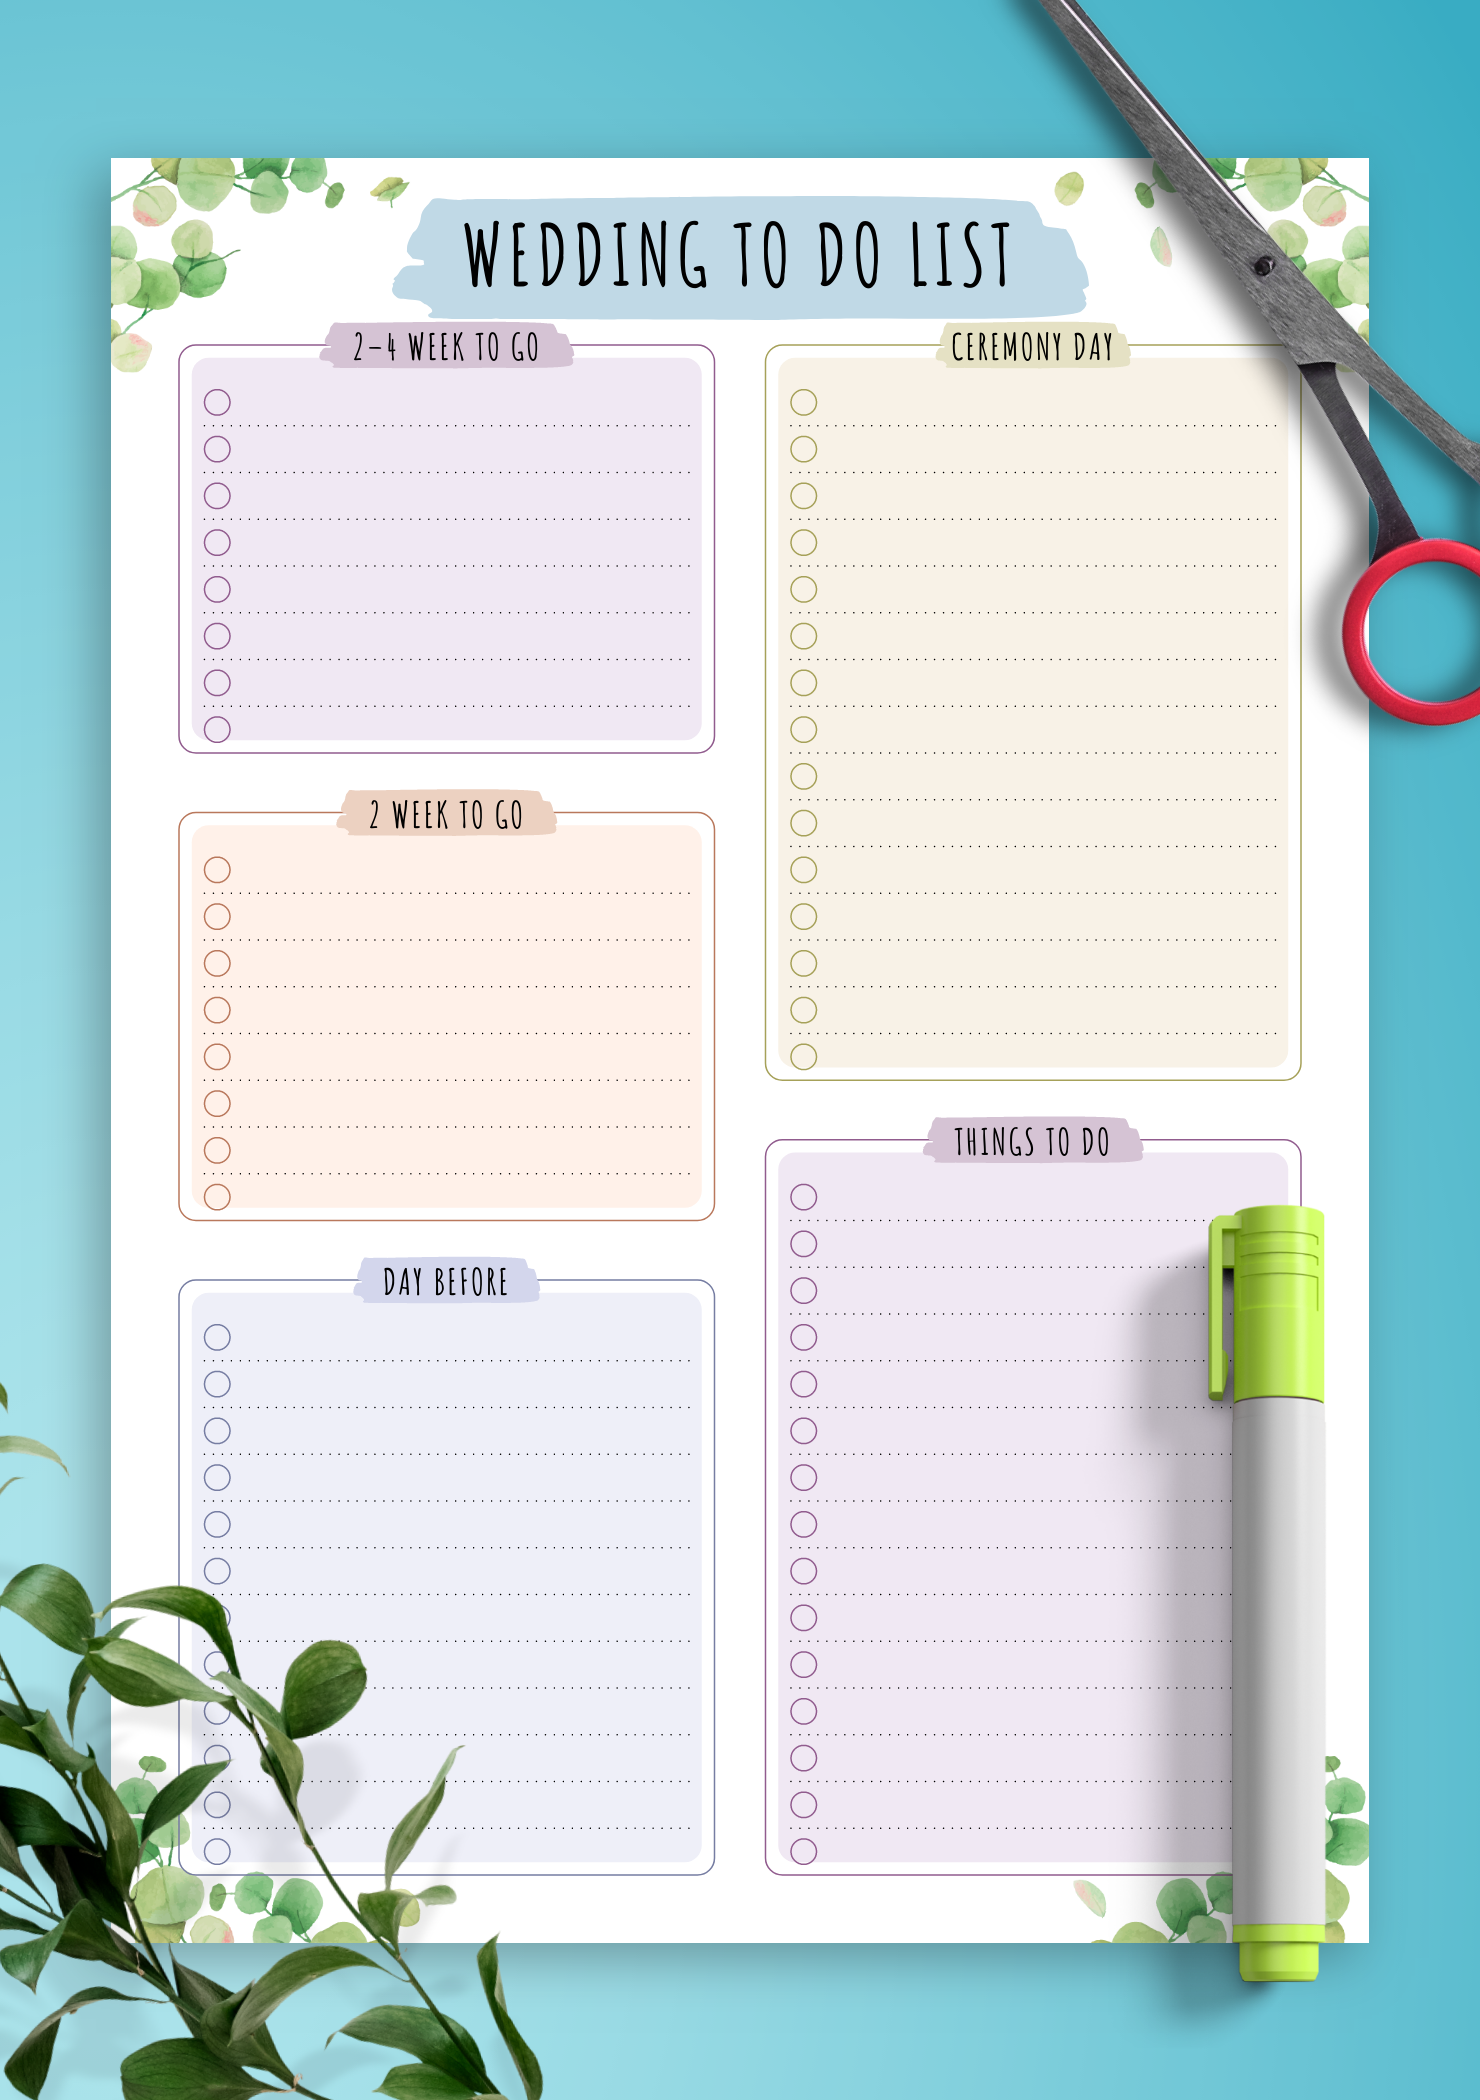 Download Printable Wedding To Do List Template - Floral PDF